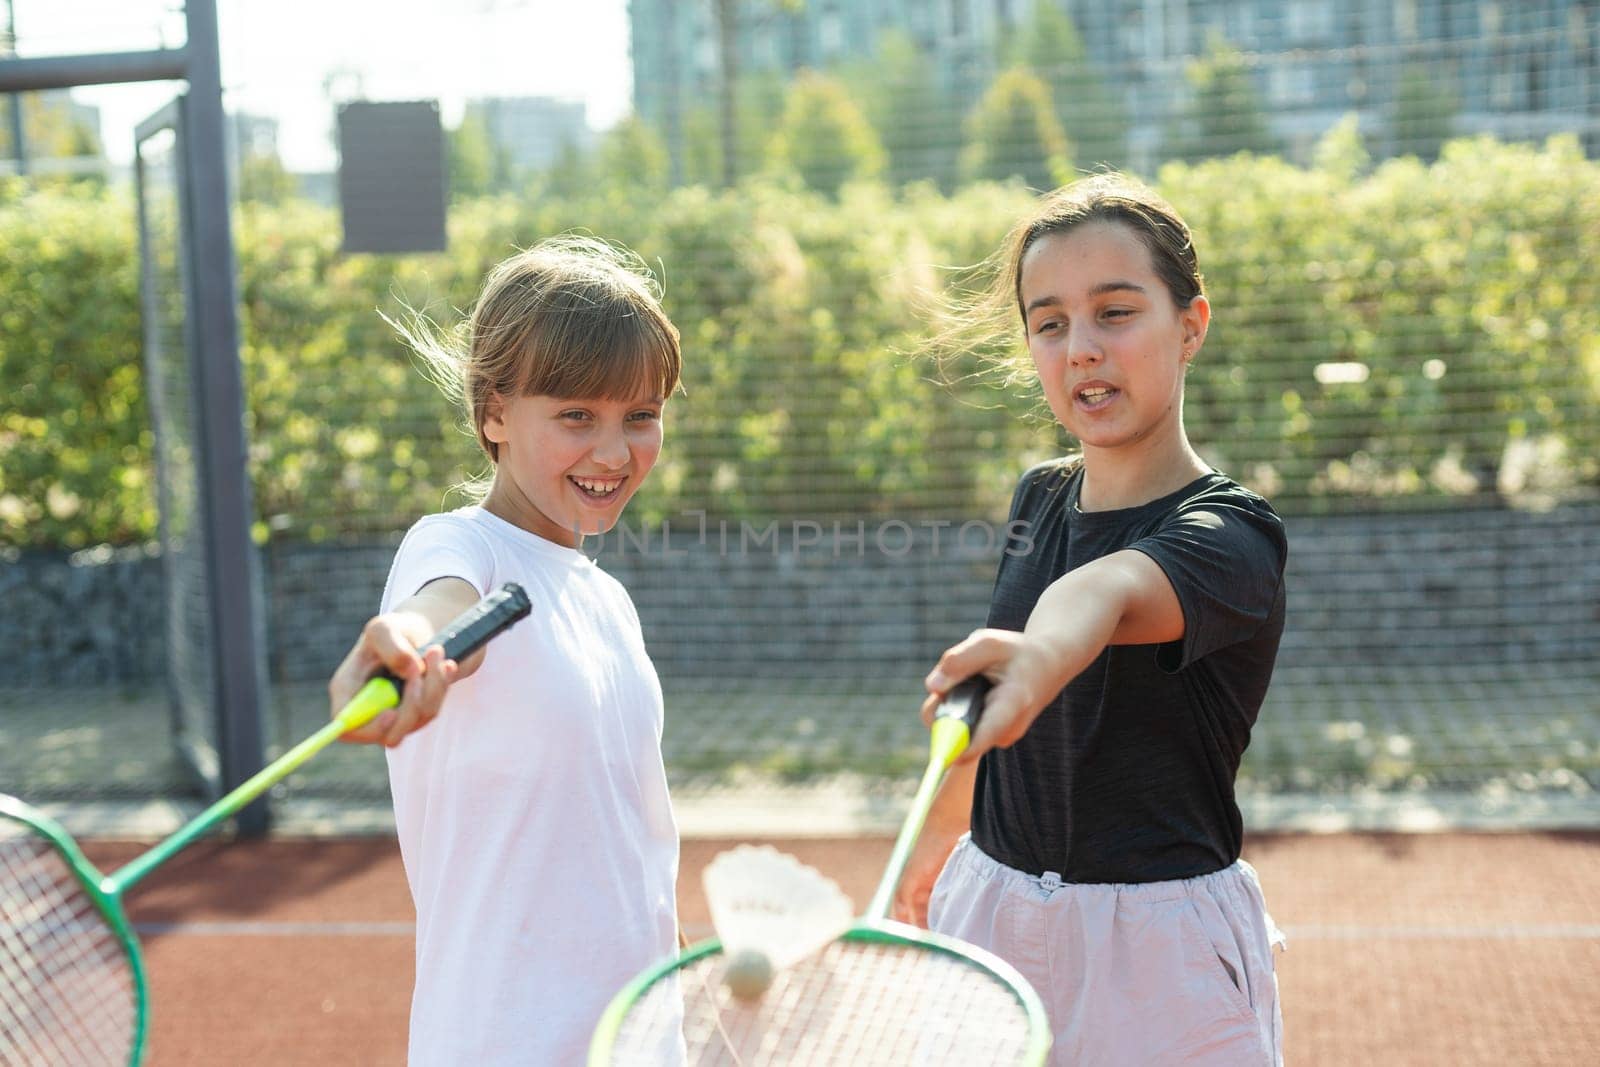 Young girls, athletes shaking hands before game session. Playing tennis on warm sunny day at open air tennis court. Concept of sport, hobby, active lifestyle, health, endurance and strength, ad by Andelov13